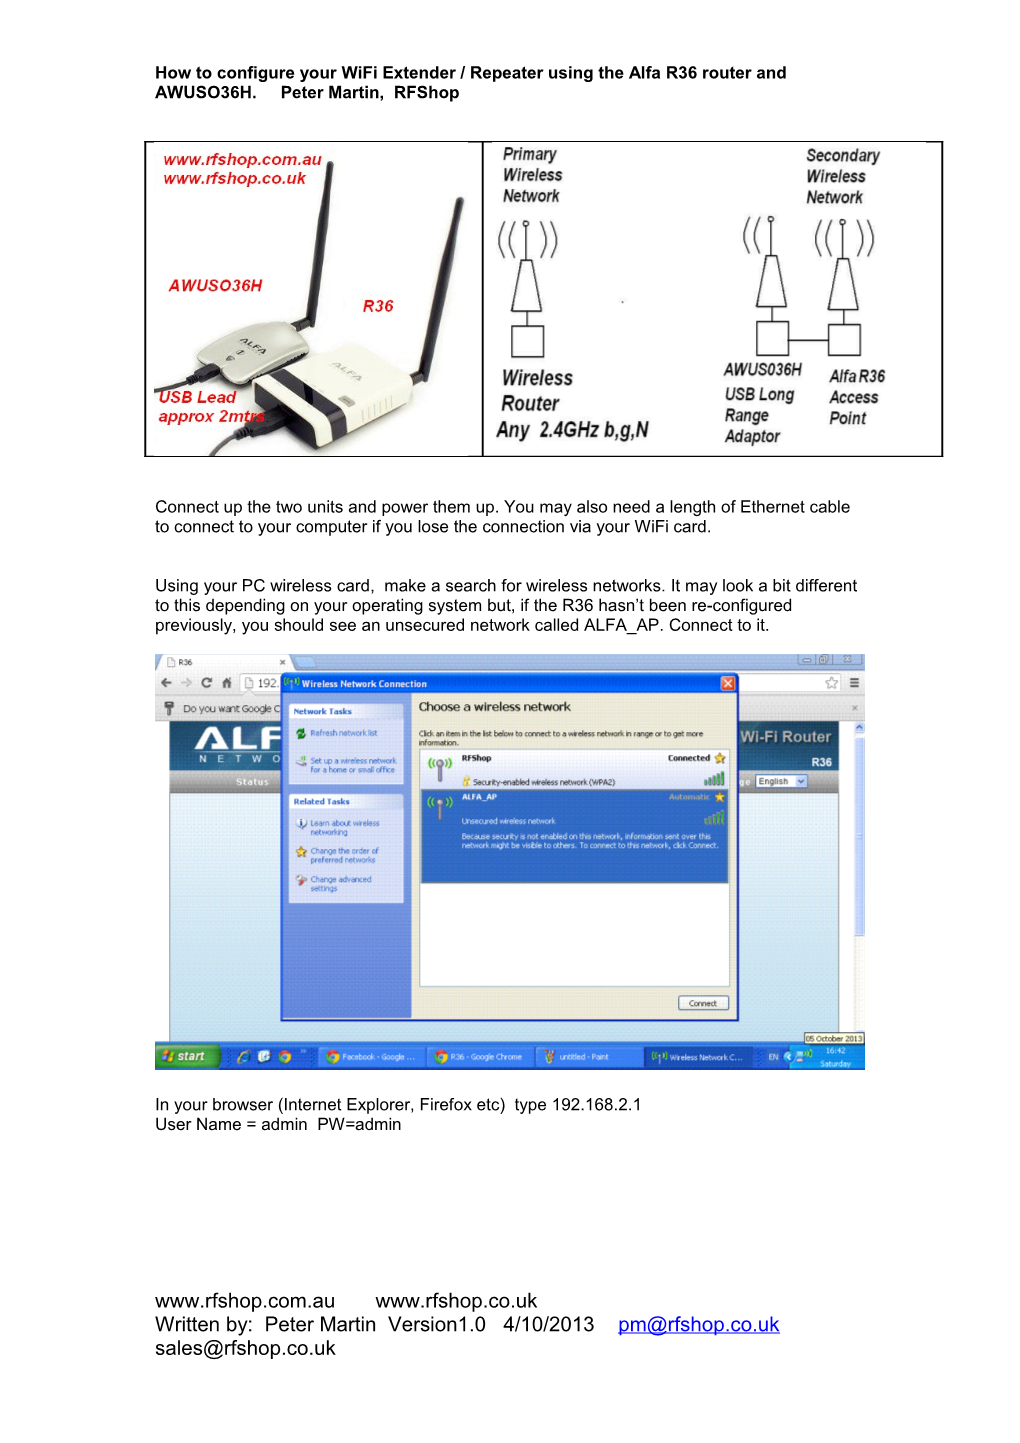 How to Set up Your Wifi Extender /Repeater Using the Alfa R52 Router and AWUSO36H